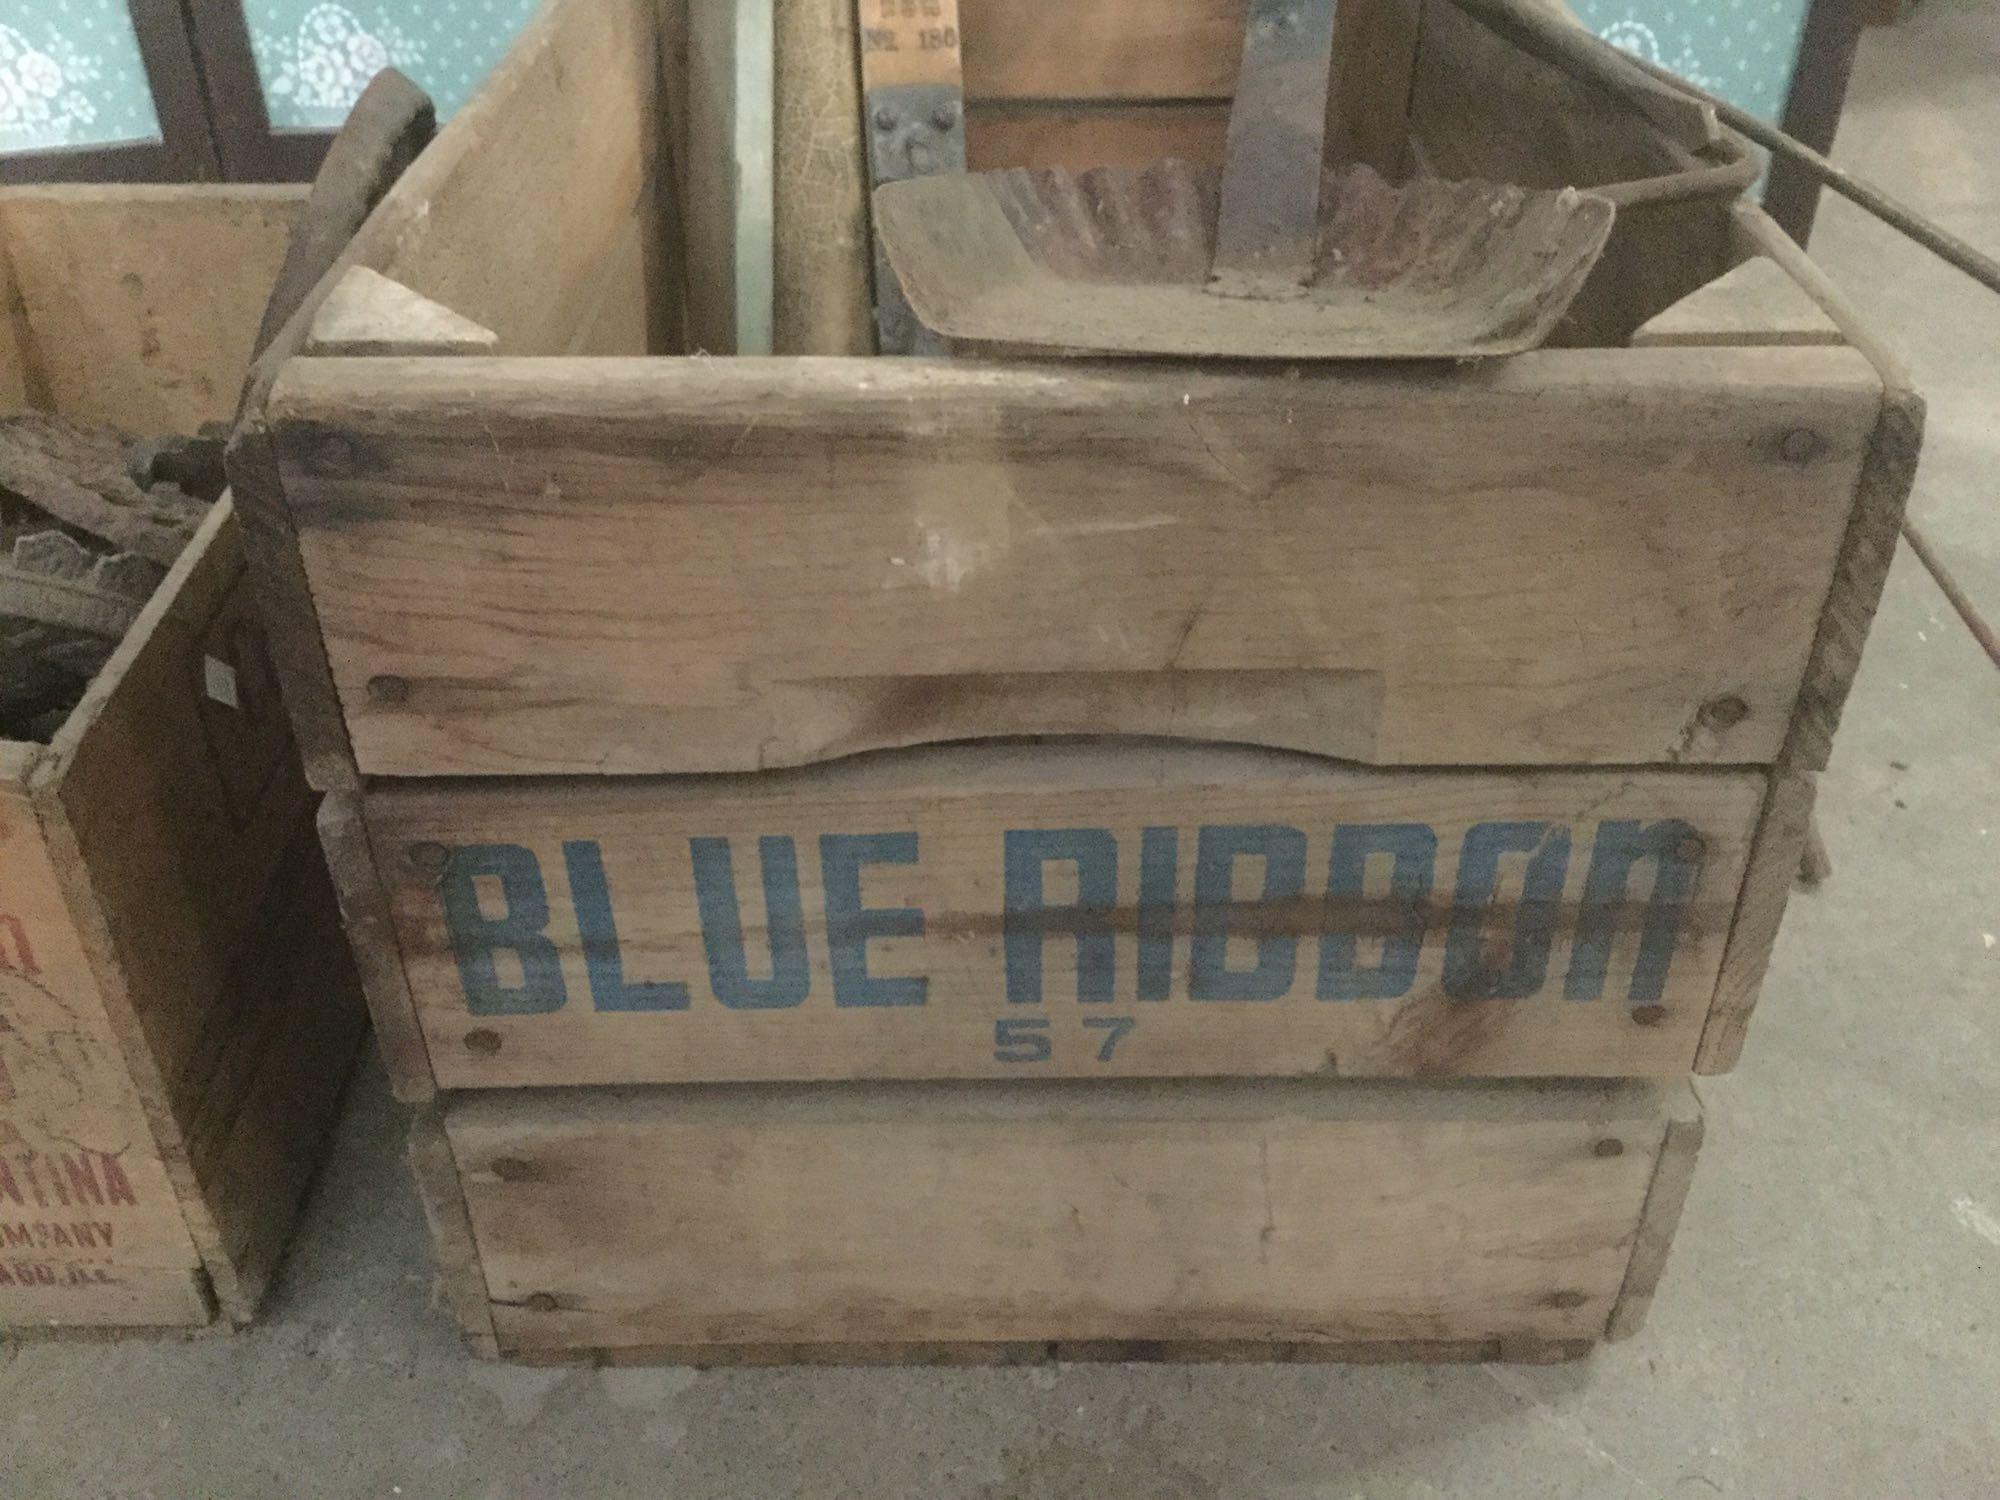 Antique blue ribbon wood crate & Swifts corned beef crate w/ antique farm & garage items